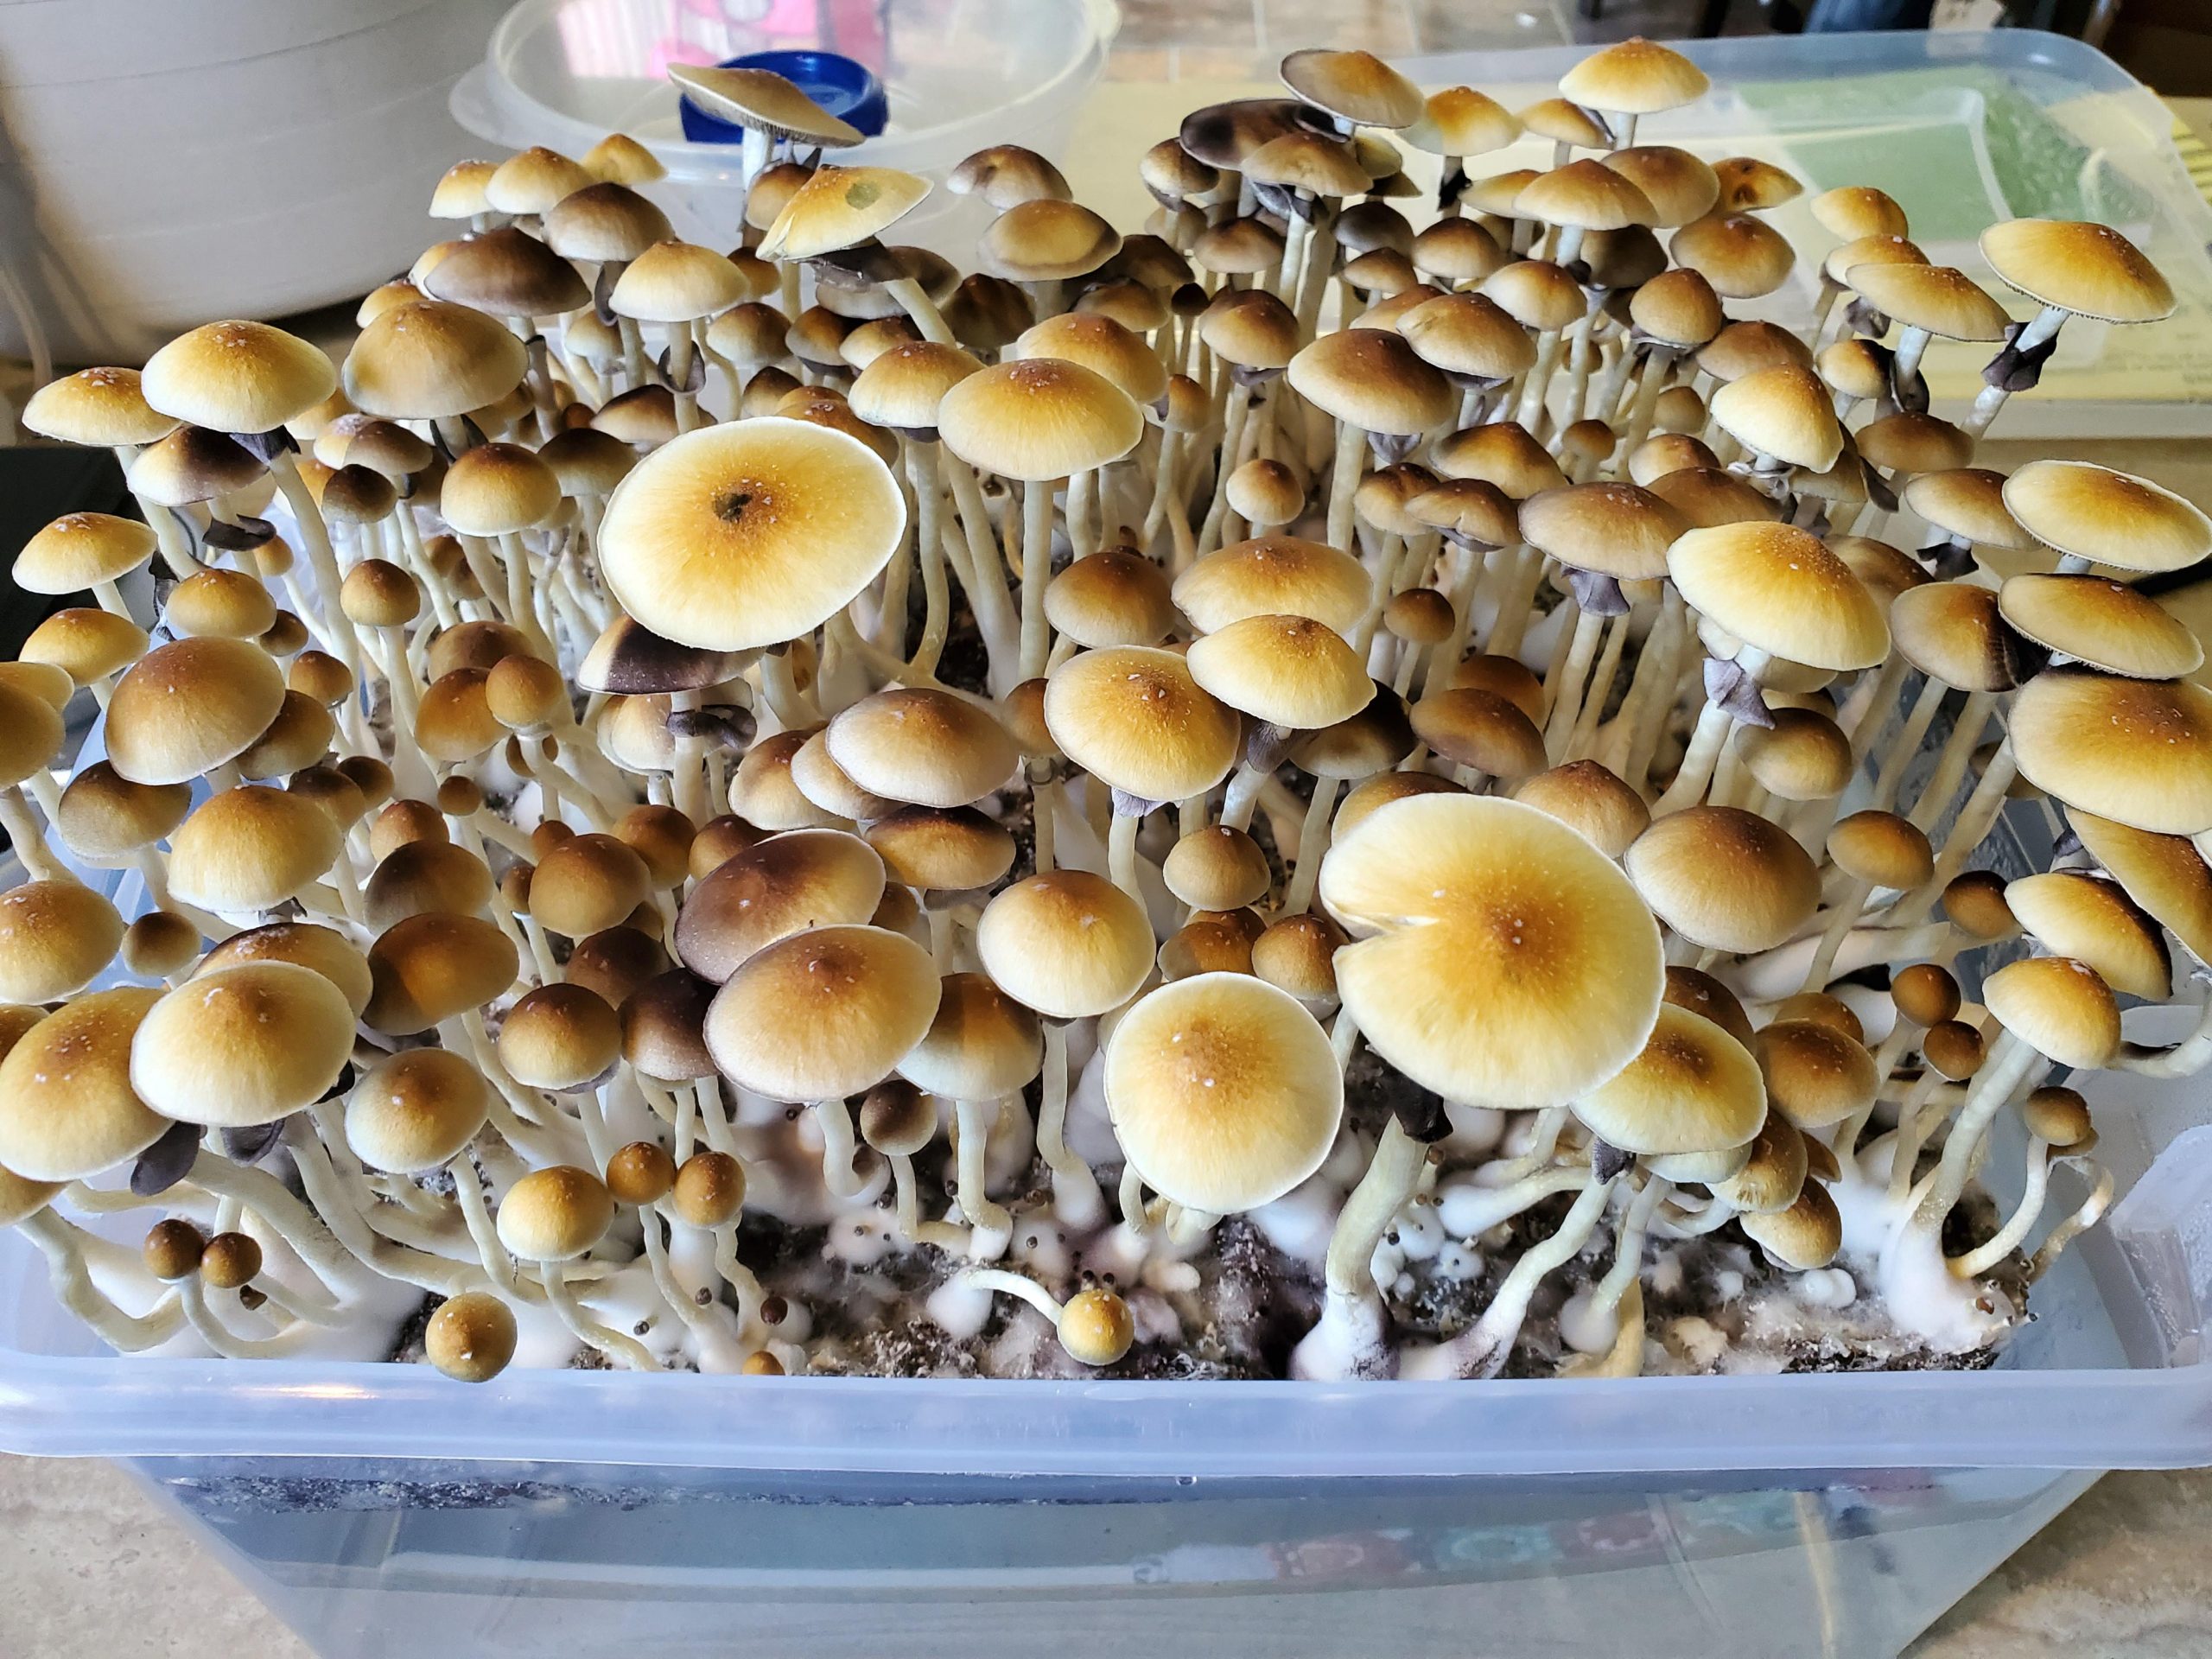 Blue Meanie Cubensis: Growing, Effects, Potency & Legality